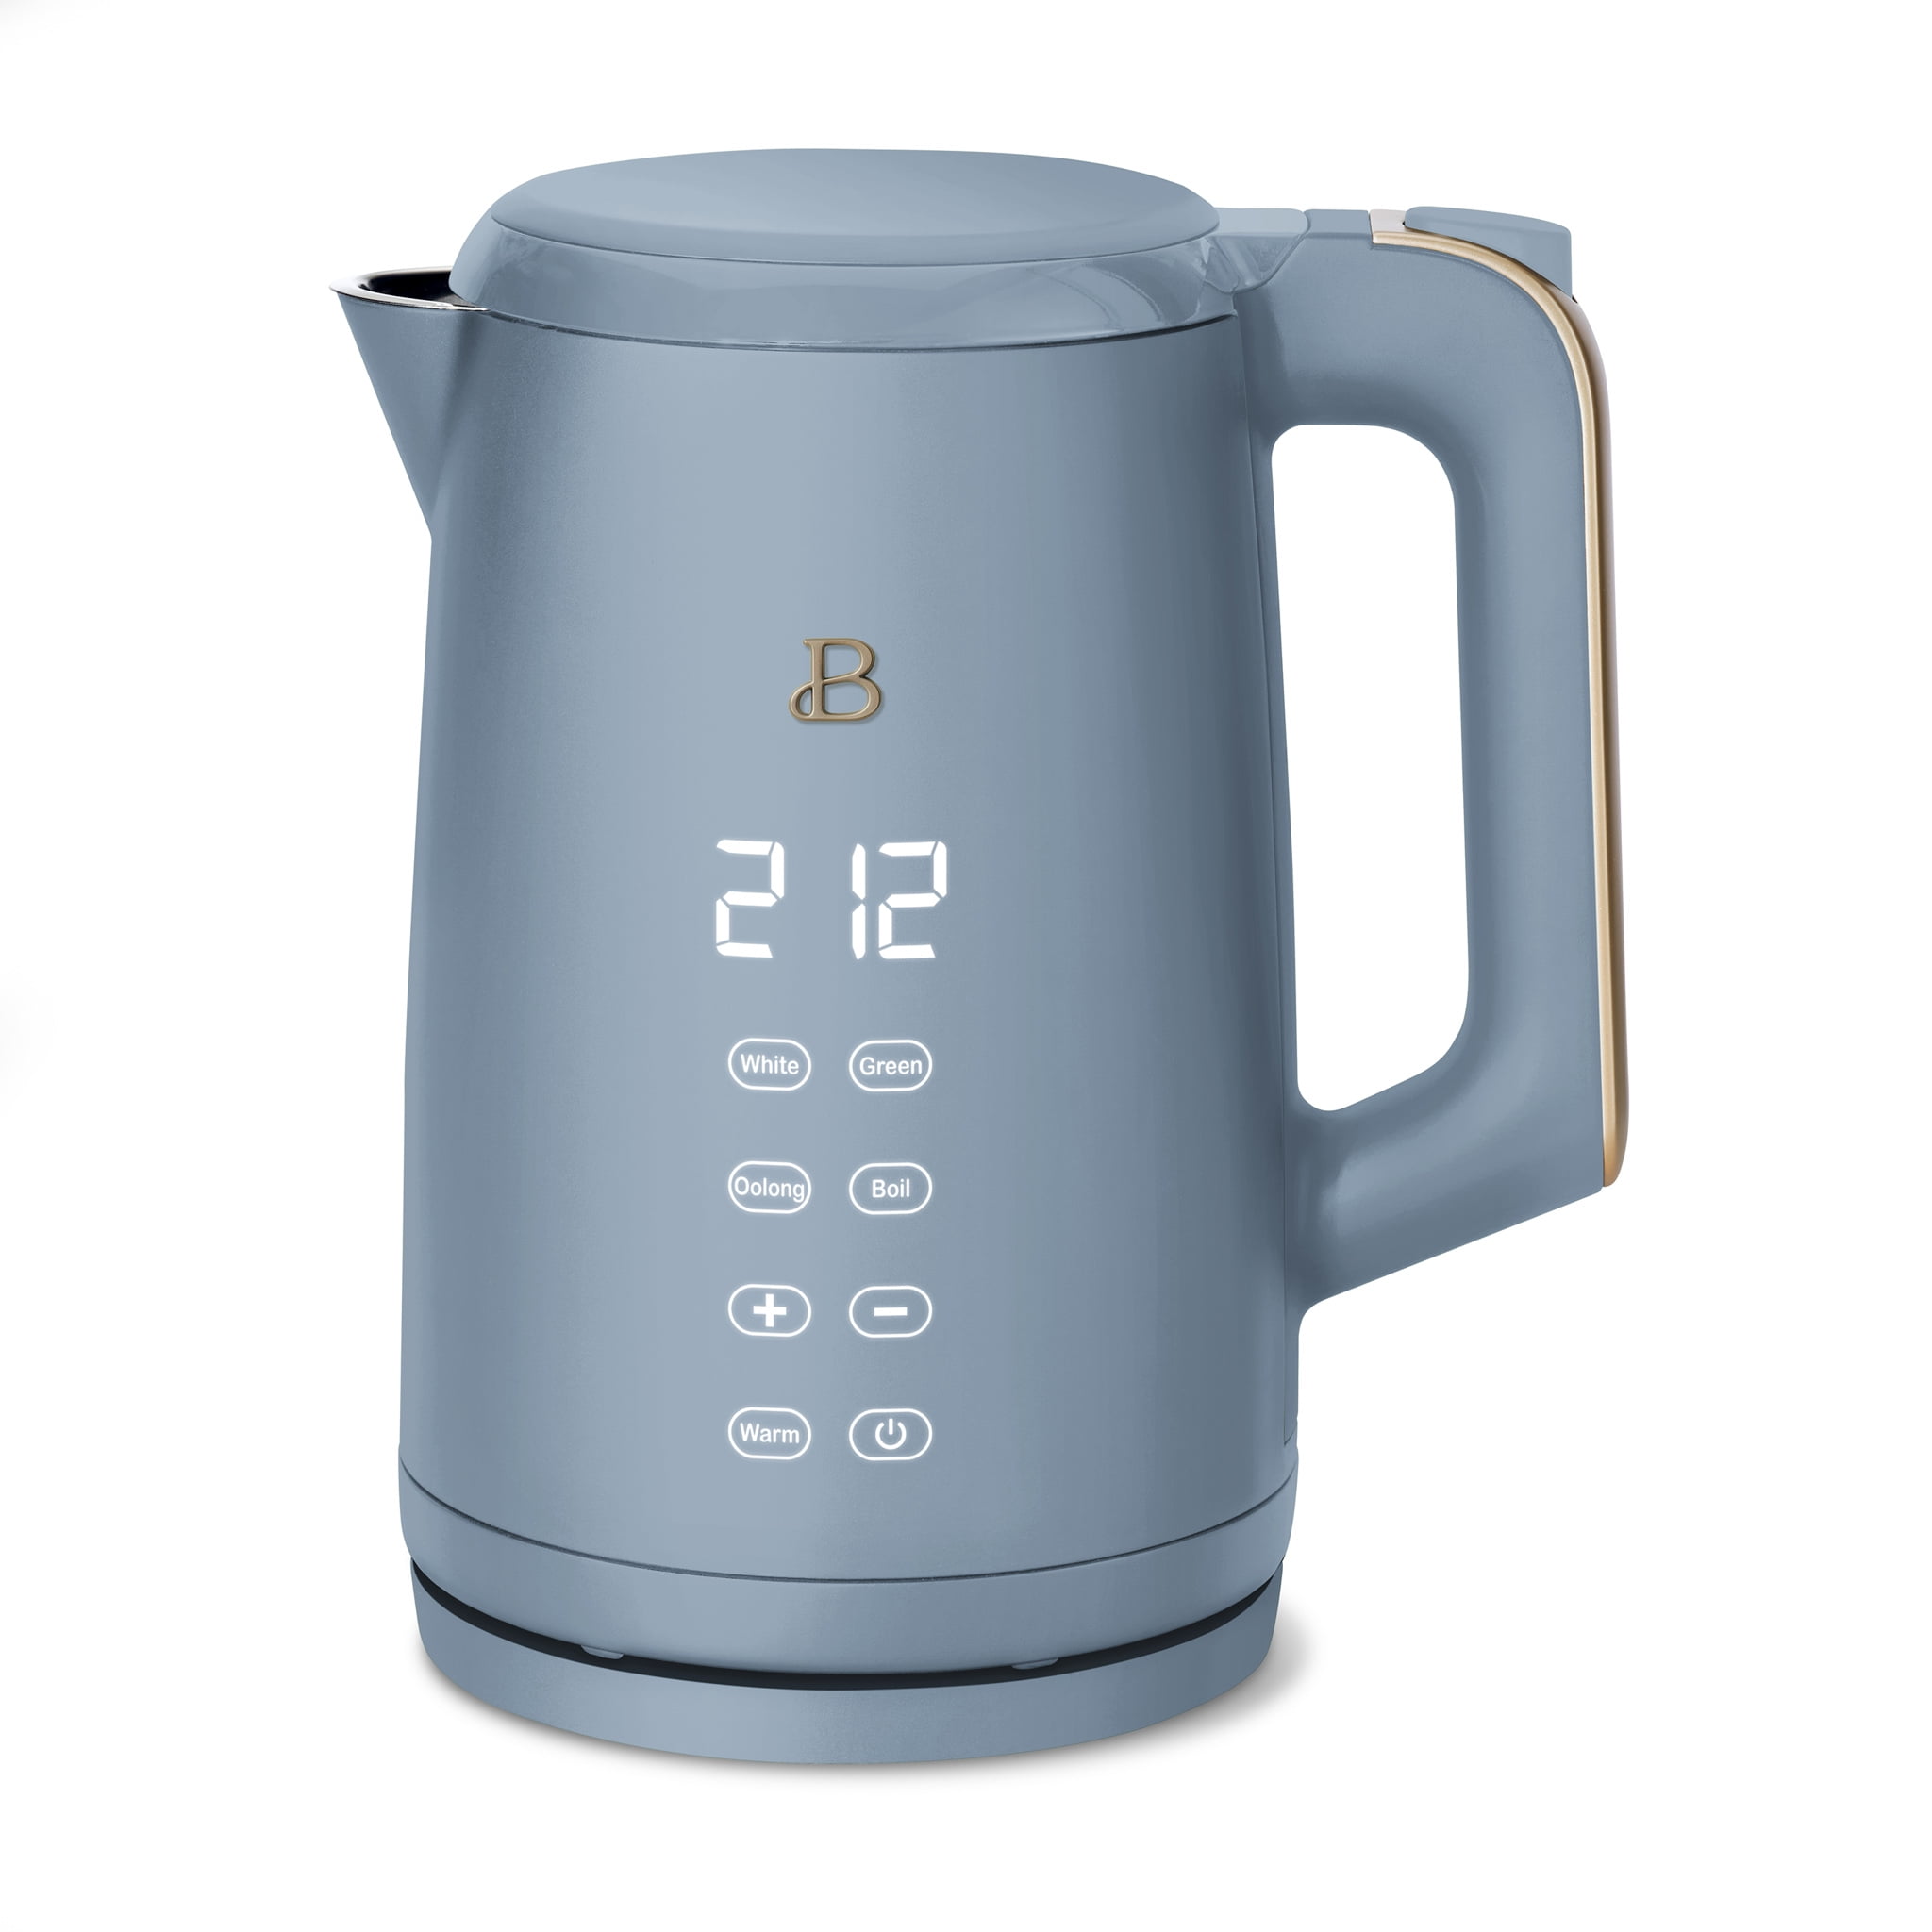 DOPUDO Smart Electric Kettle,1.7 Liter VariableTemperature Control Tea  Kettle with LED Polychrome Indicators,Auto-Shutoff and Boil-Dry